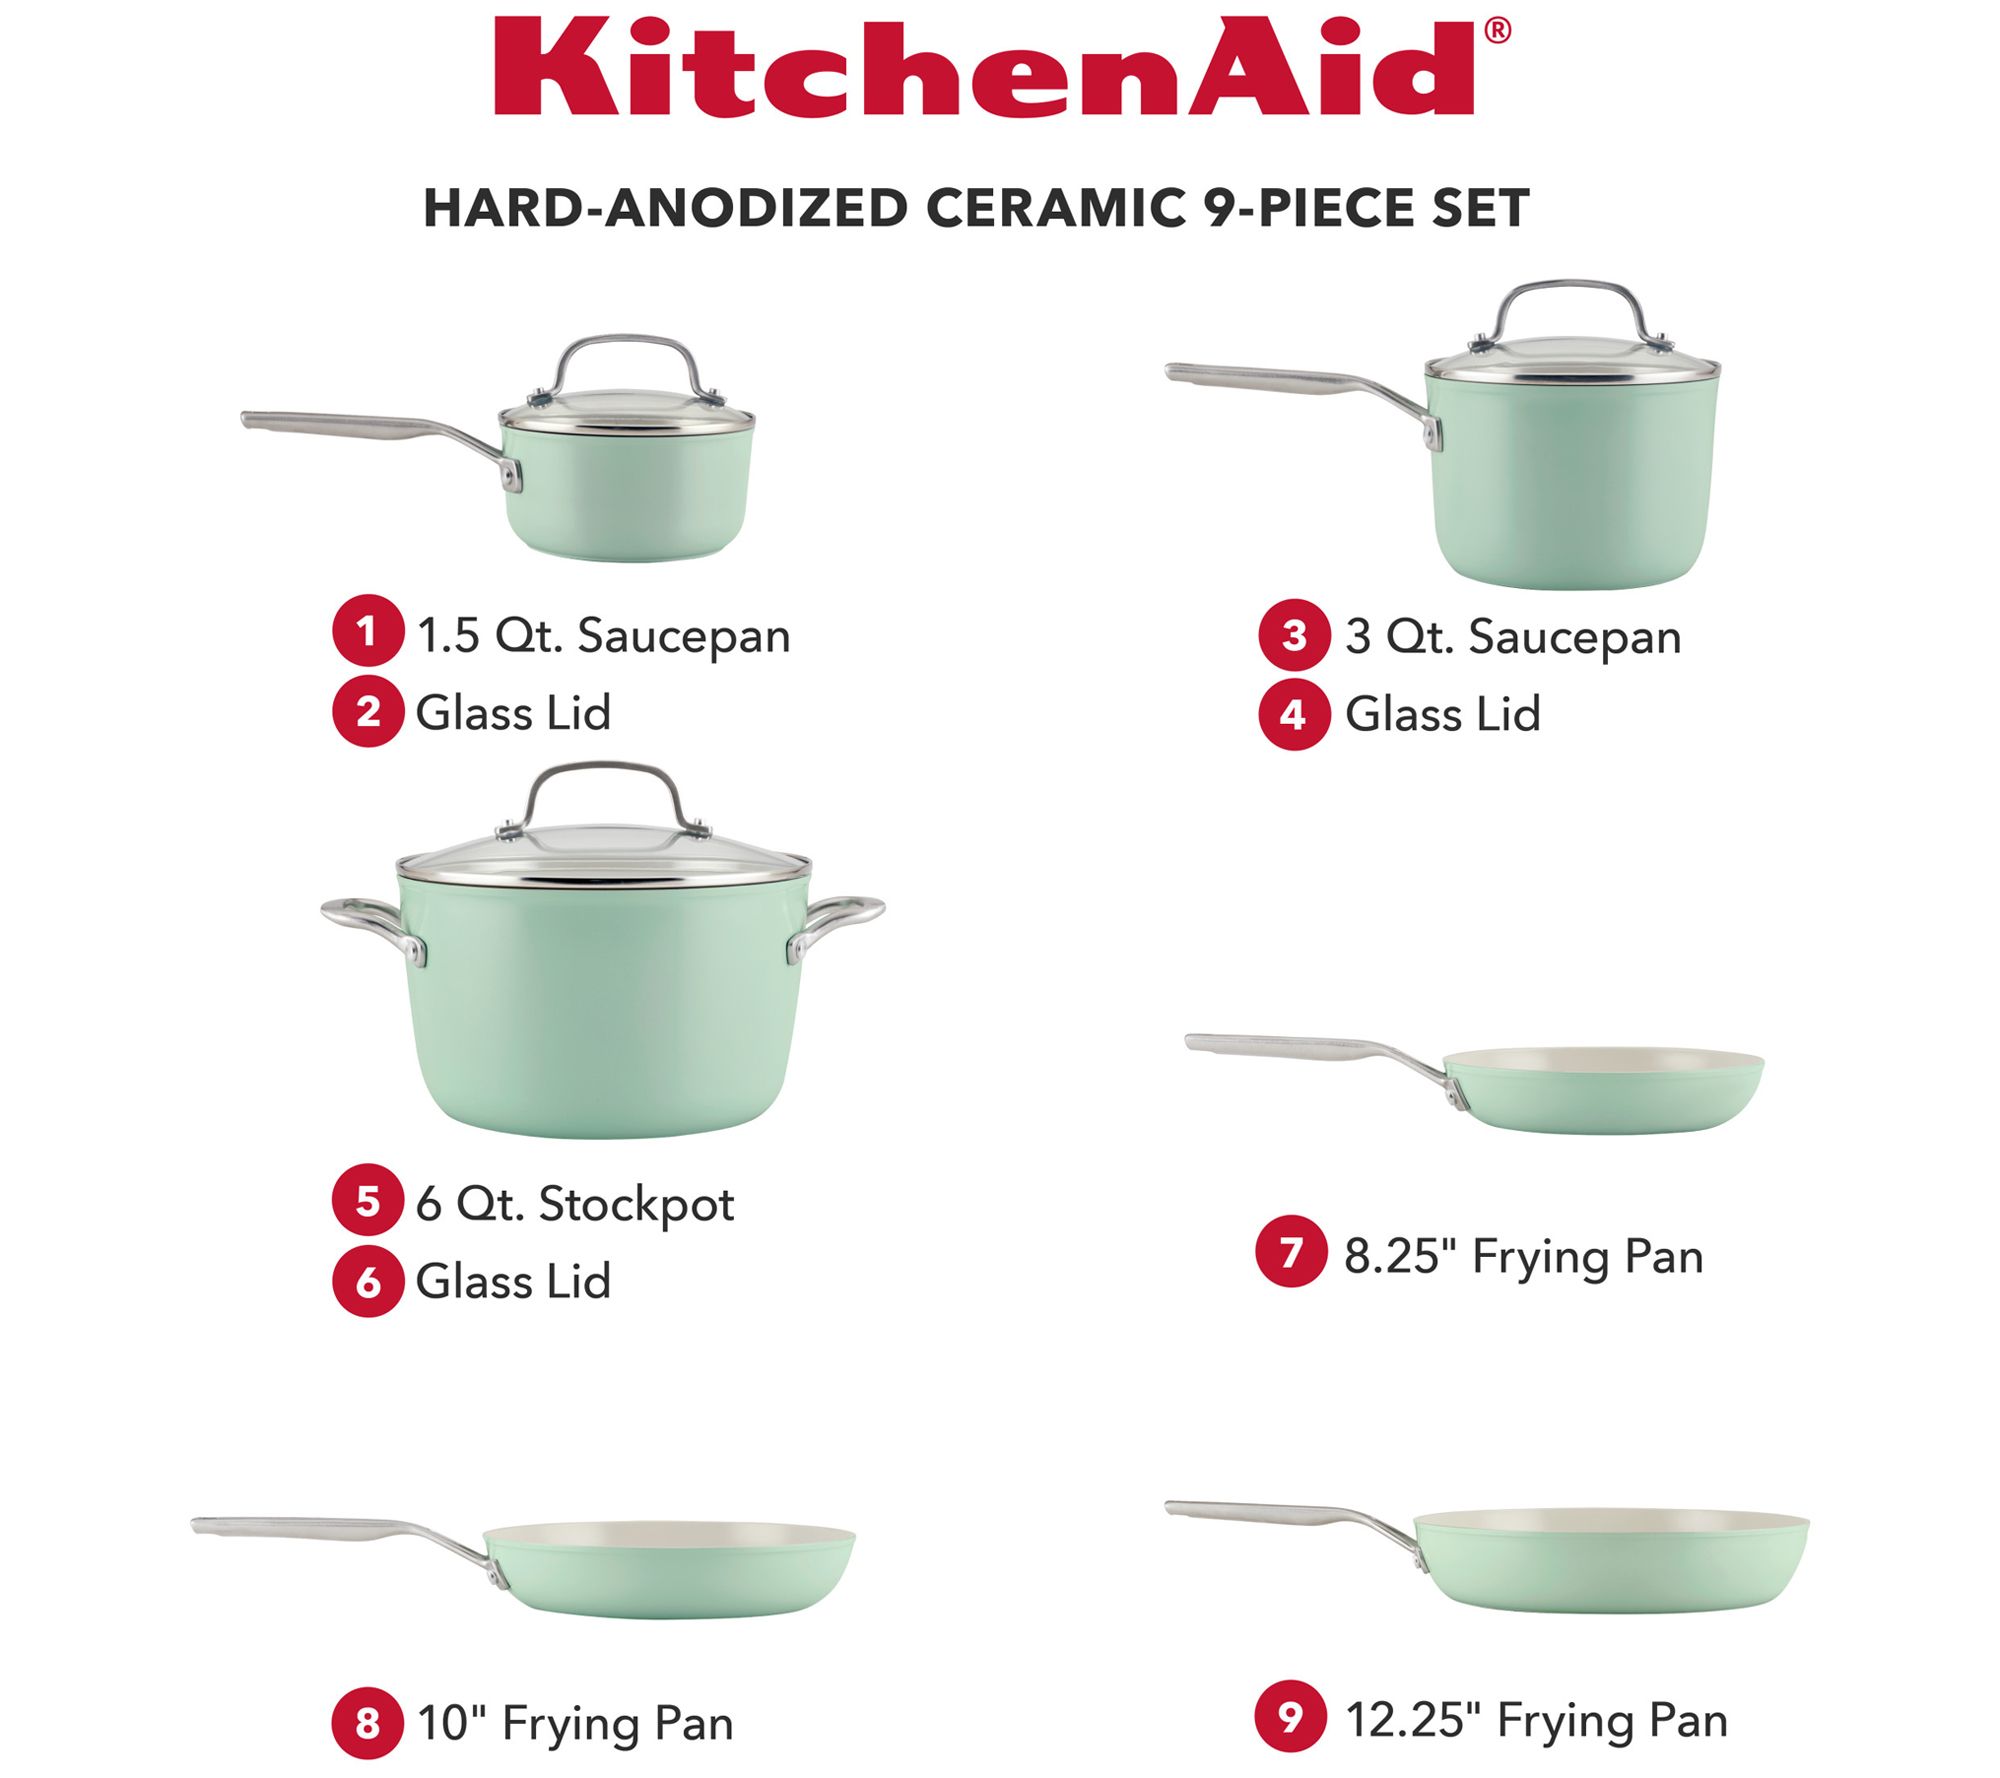 KitchenAid Cookware Review: Is this ceramic cookware set worth buying? -  Reviewed